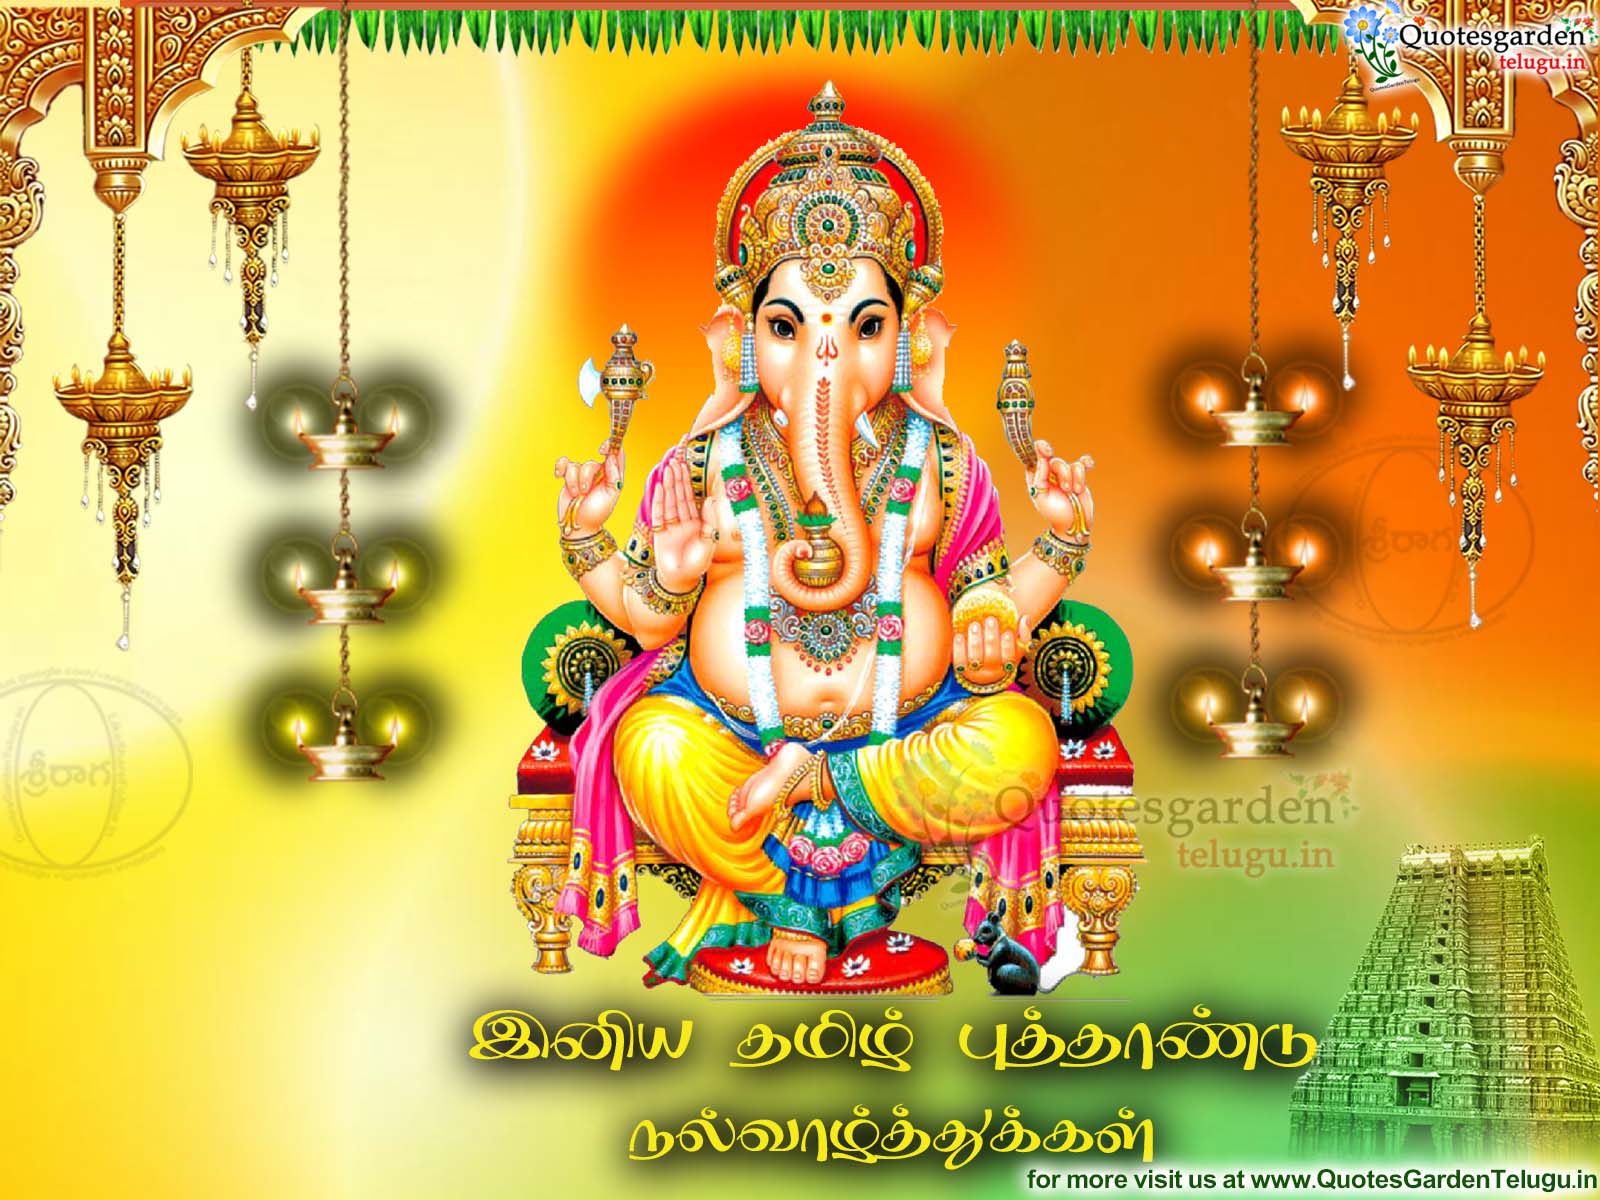 Tamil New Year Greetings Wishes Quotes Messages Images Sms Quotes